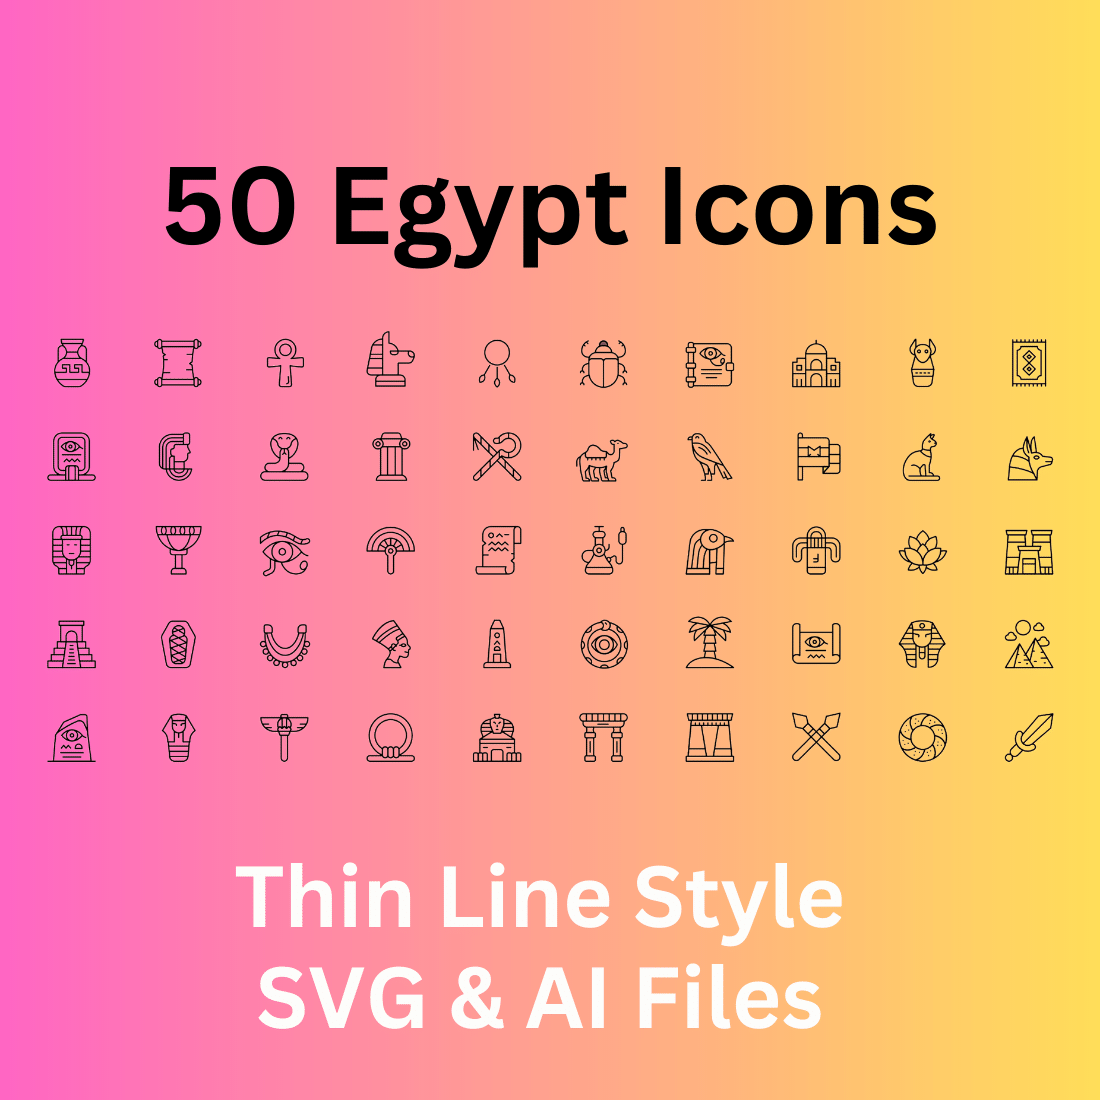 Egypt Icon Set 50 Outline Icons - SVG And AI Files cover image.